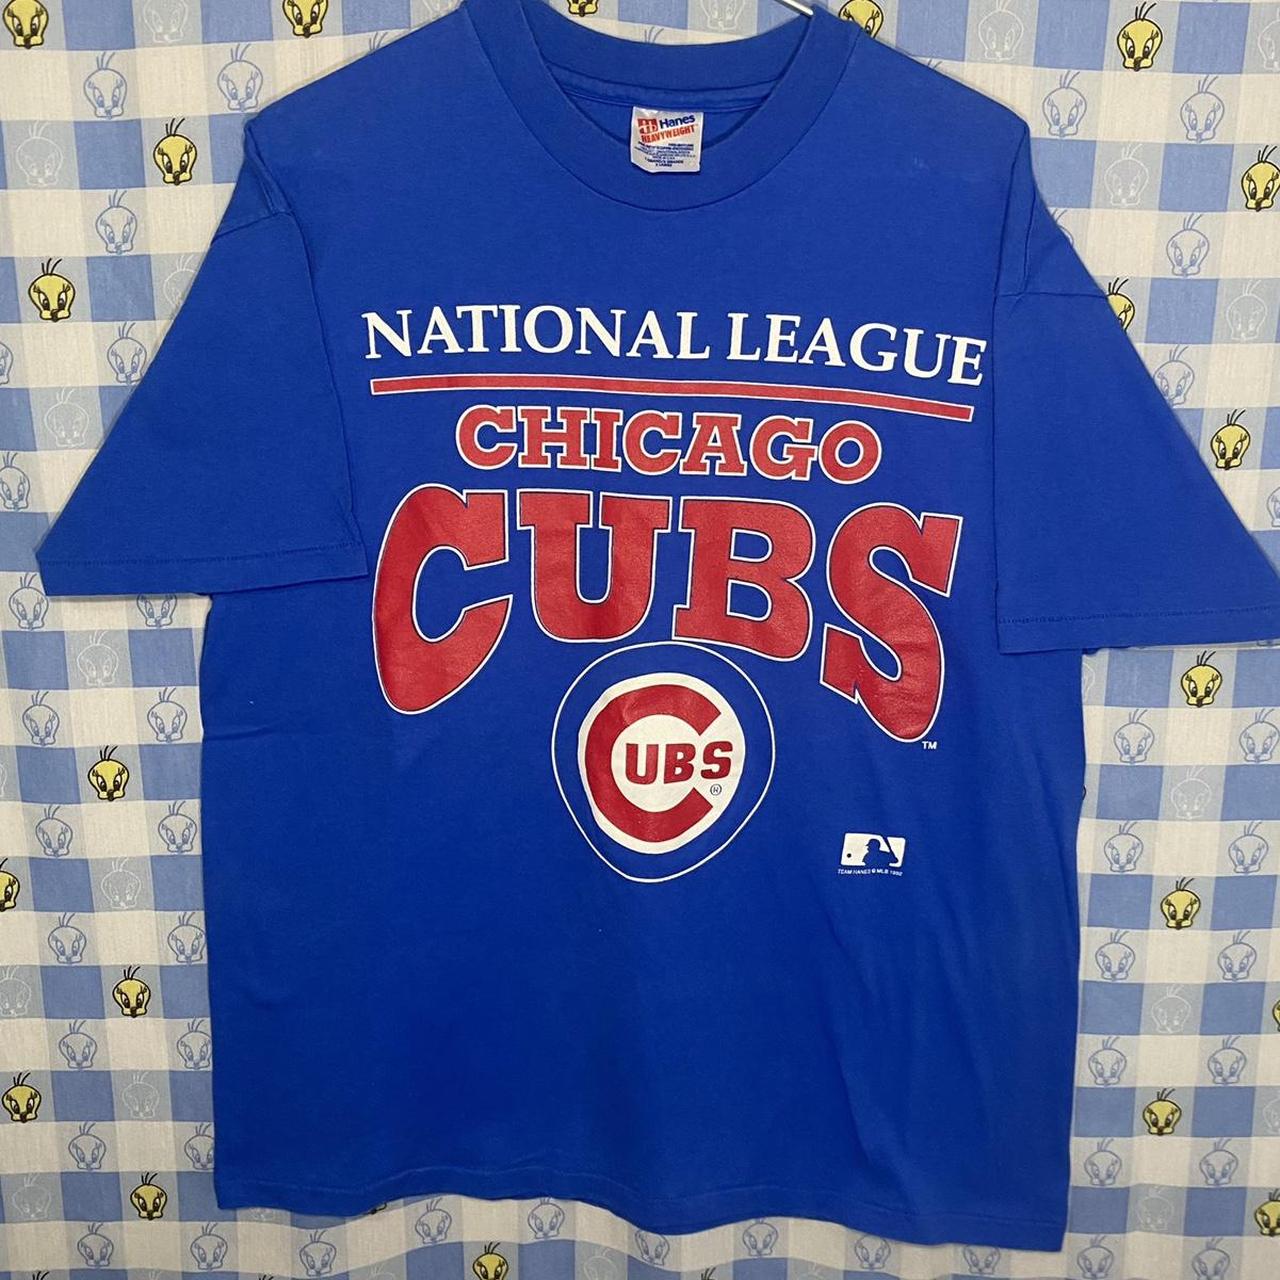 1992 Chicago Cubs T-Shirt, Early 90s Vintage MLB